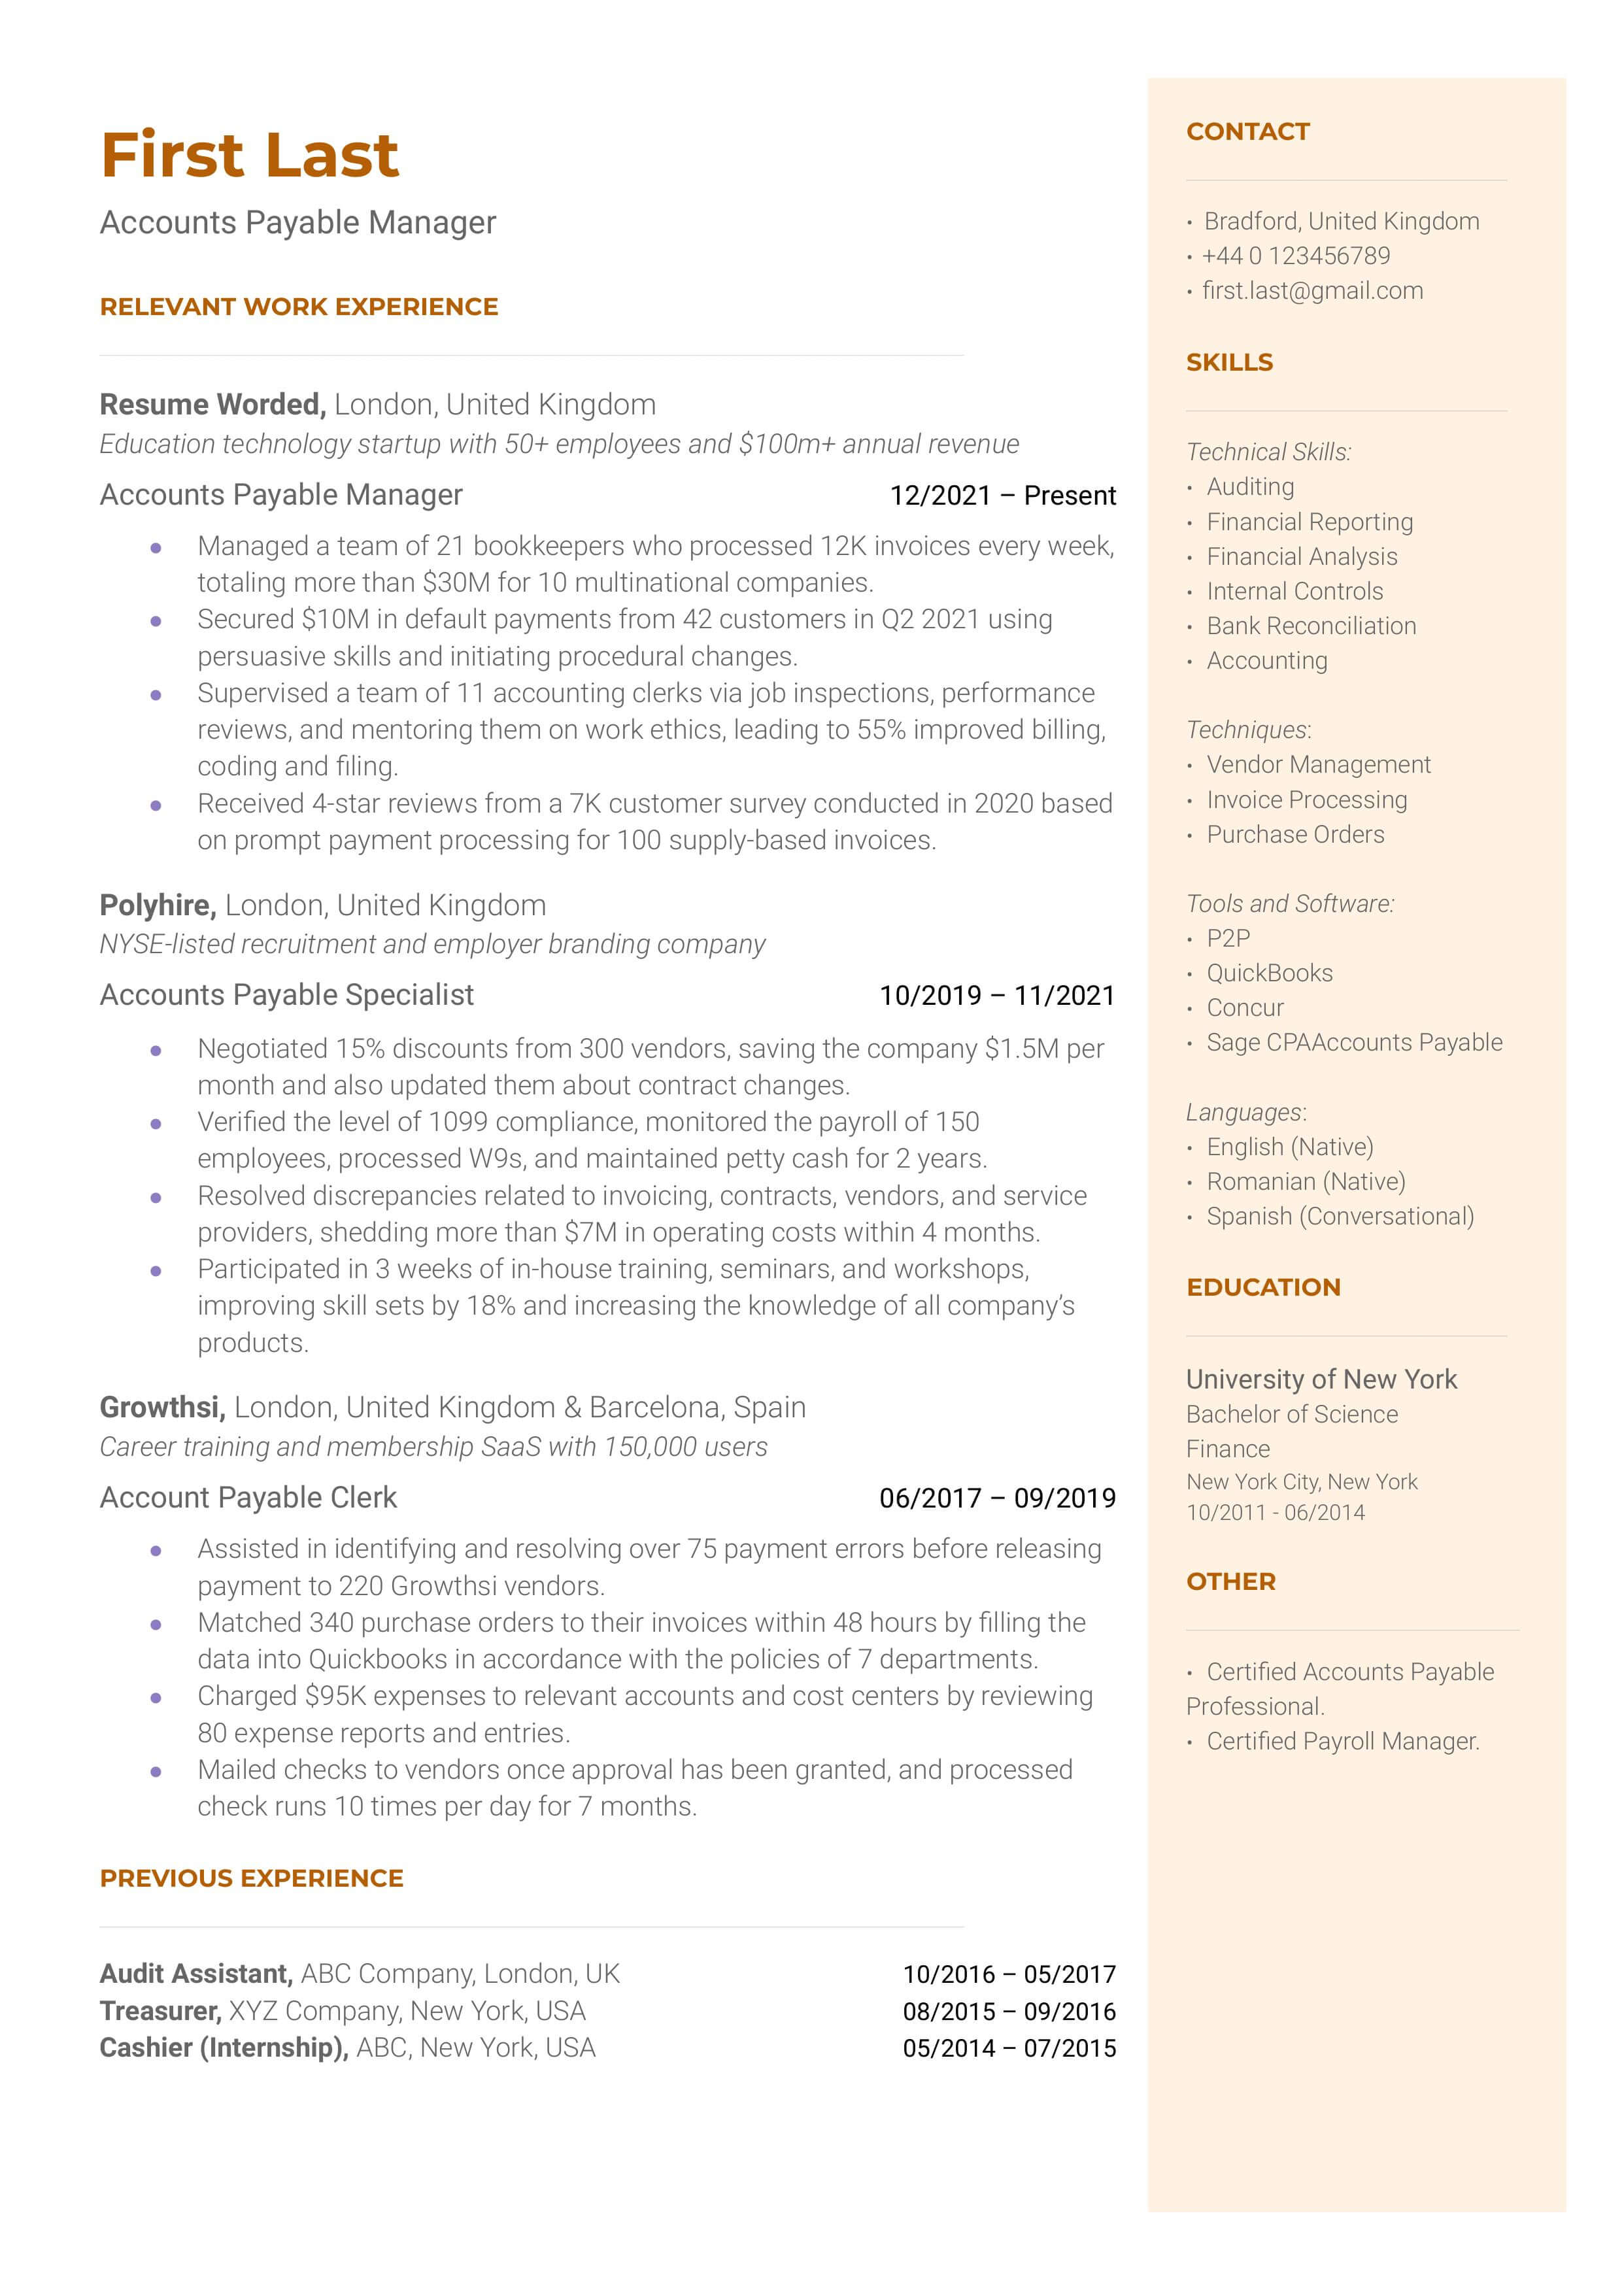 View this example template to make your own accounts payable manager resume that lands you your job.